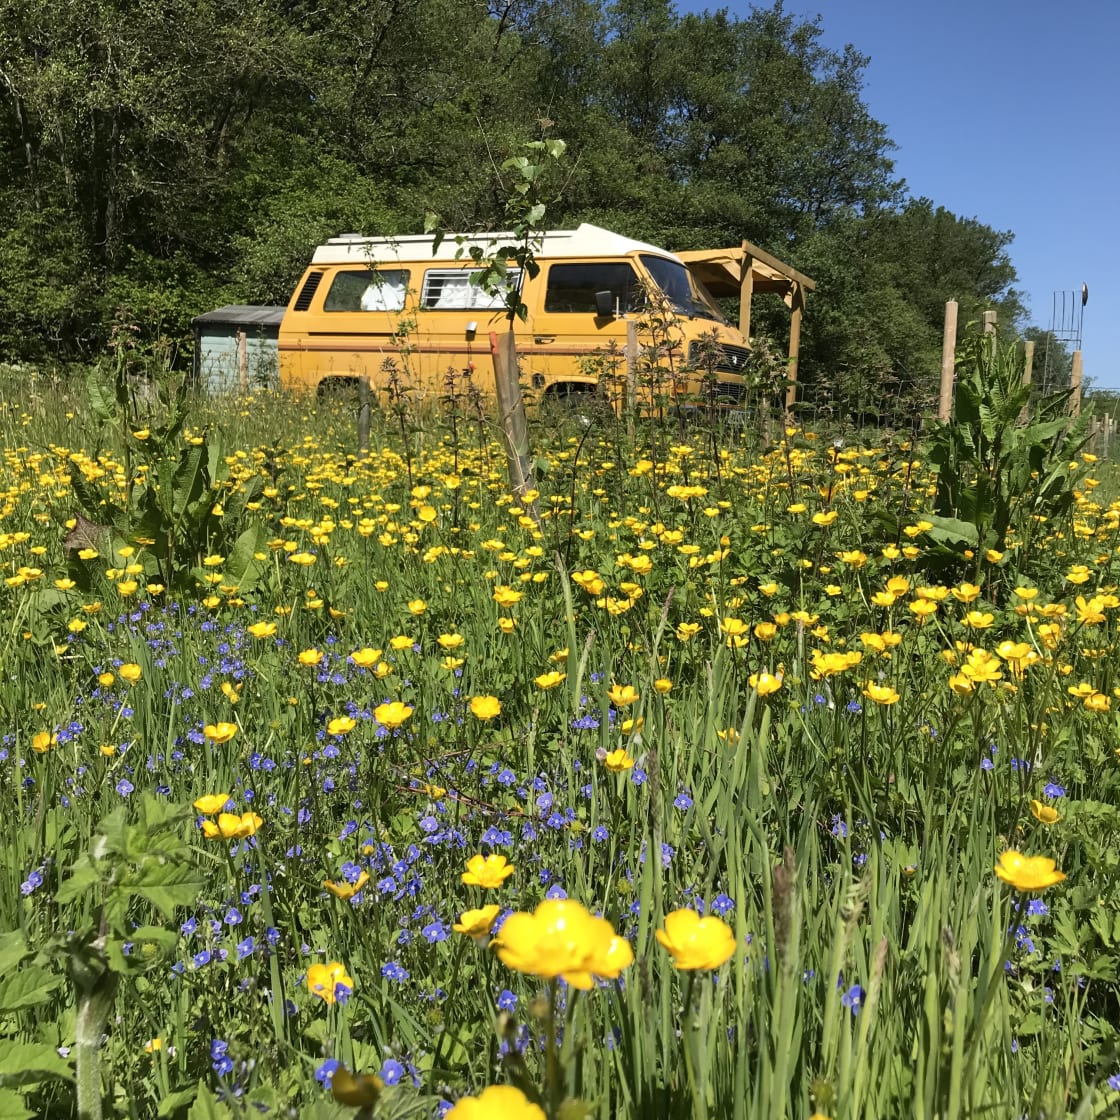 The Little Van in the Valley amongst the summer flowers